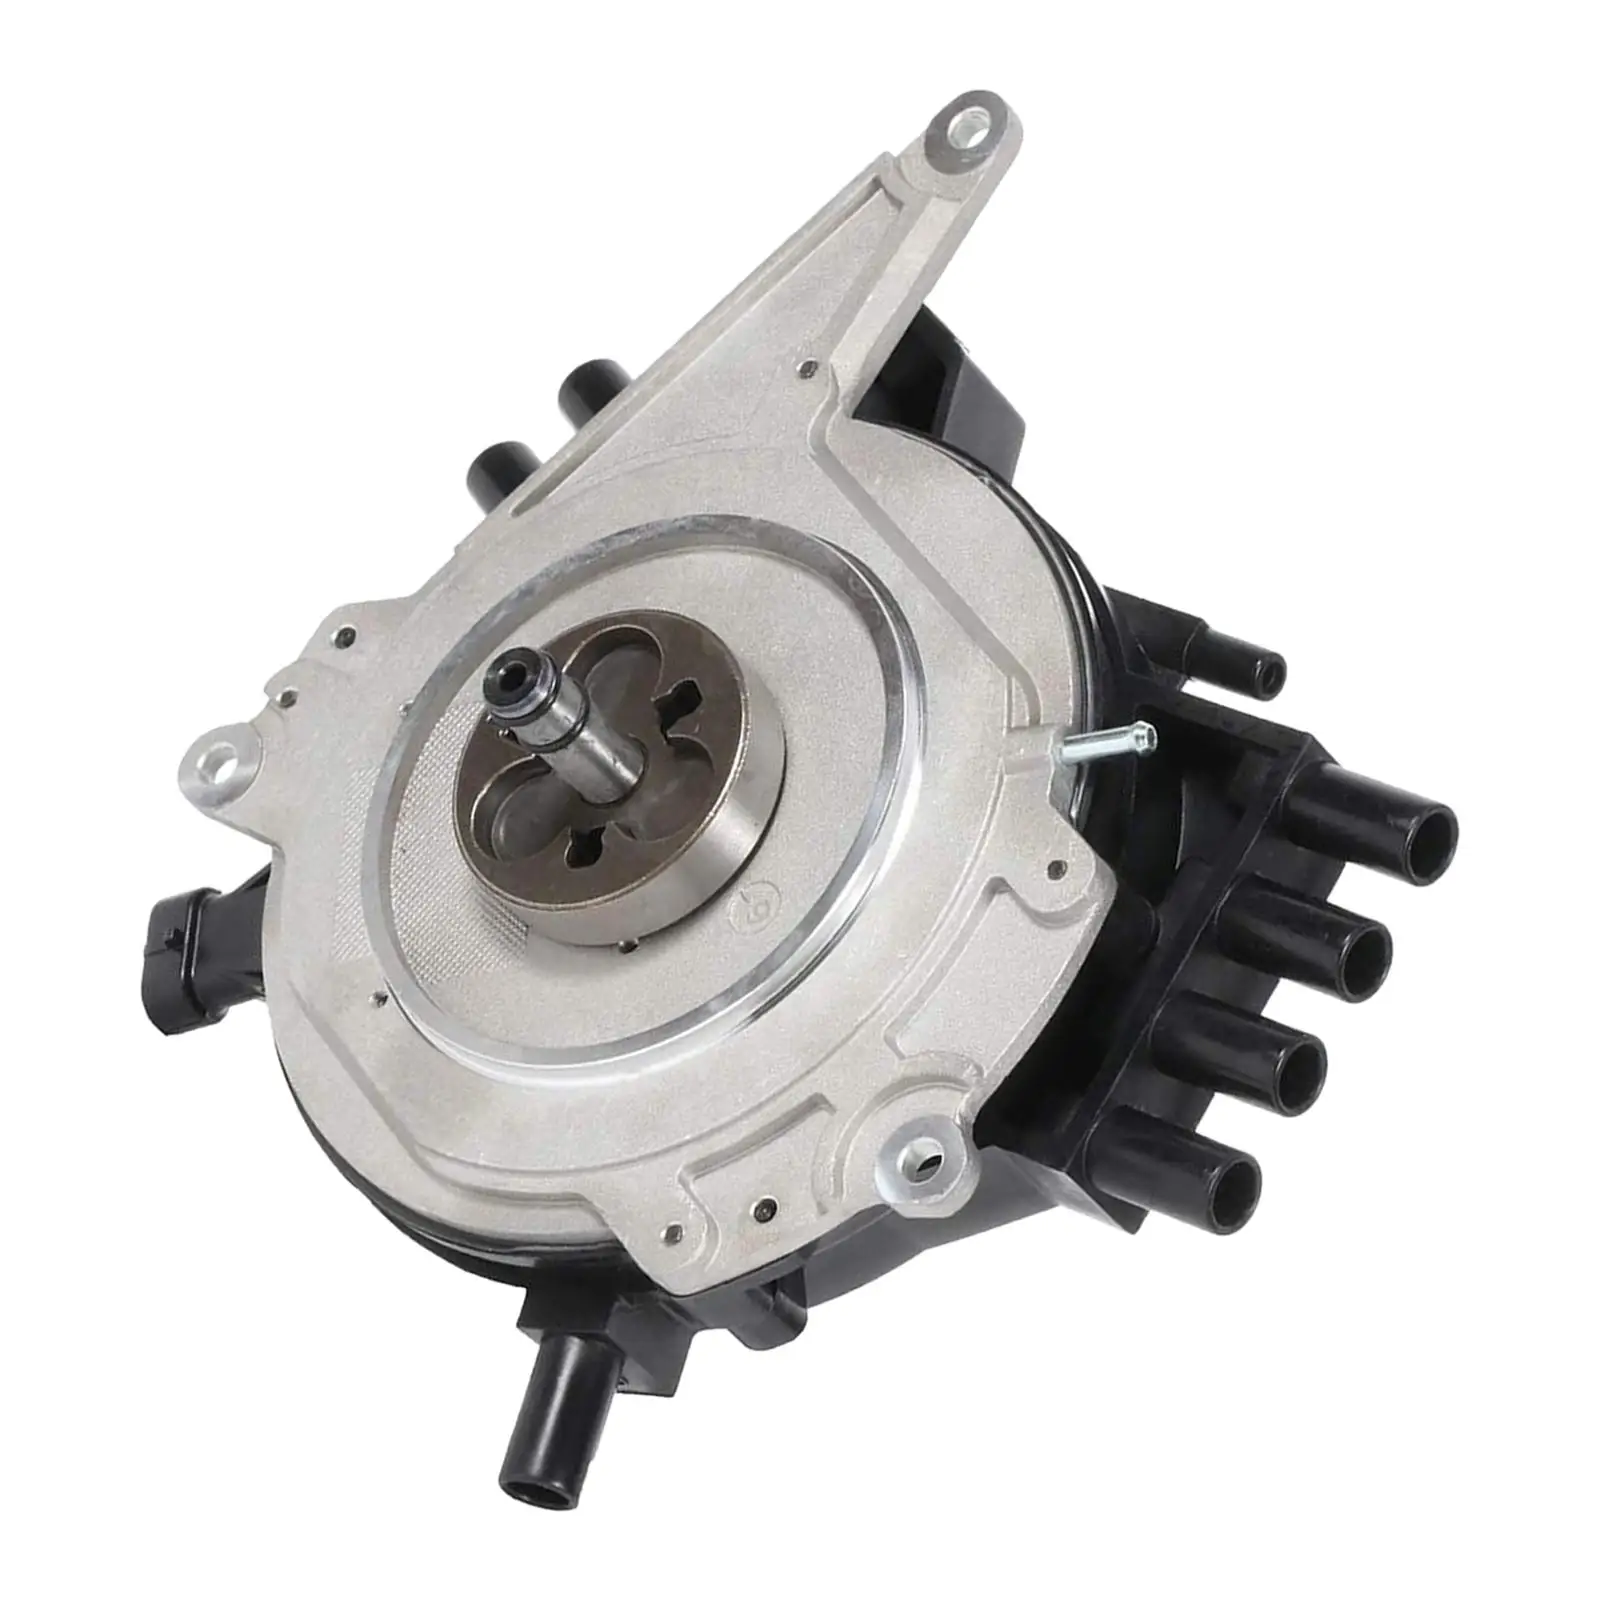 Ignition Distributor Replaces Parts Spare Parts for Buick Roadmaster V8 5.7L p1996 Easy to Install Accessories